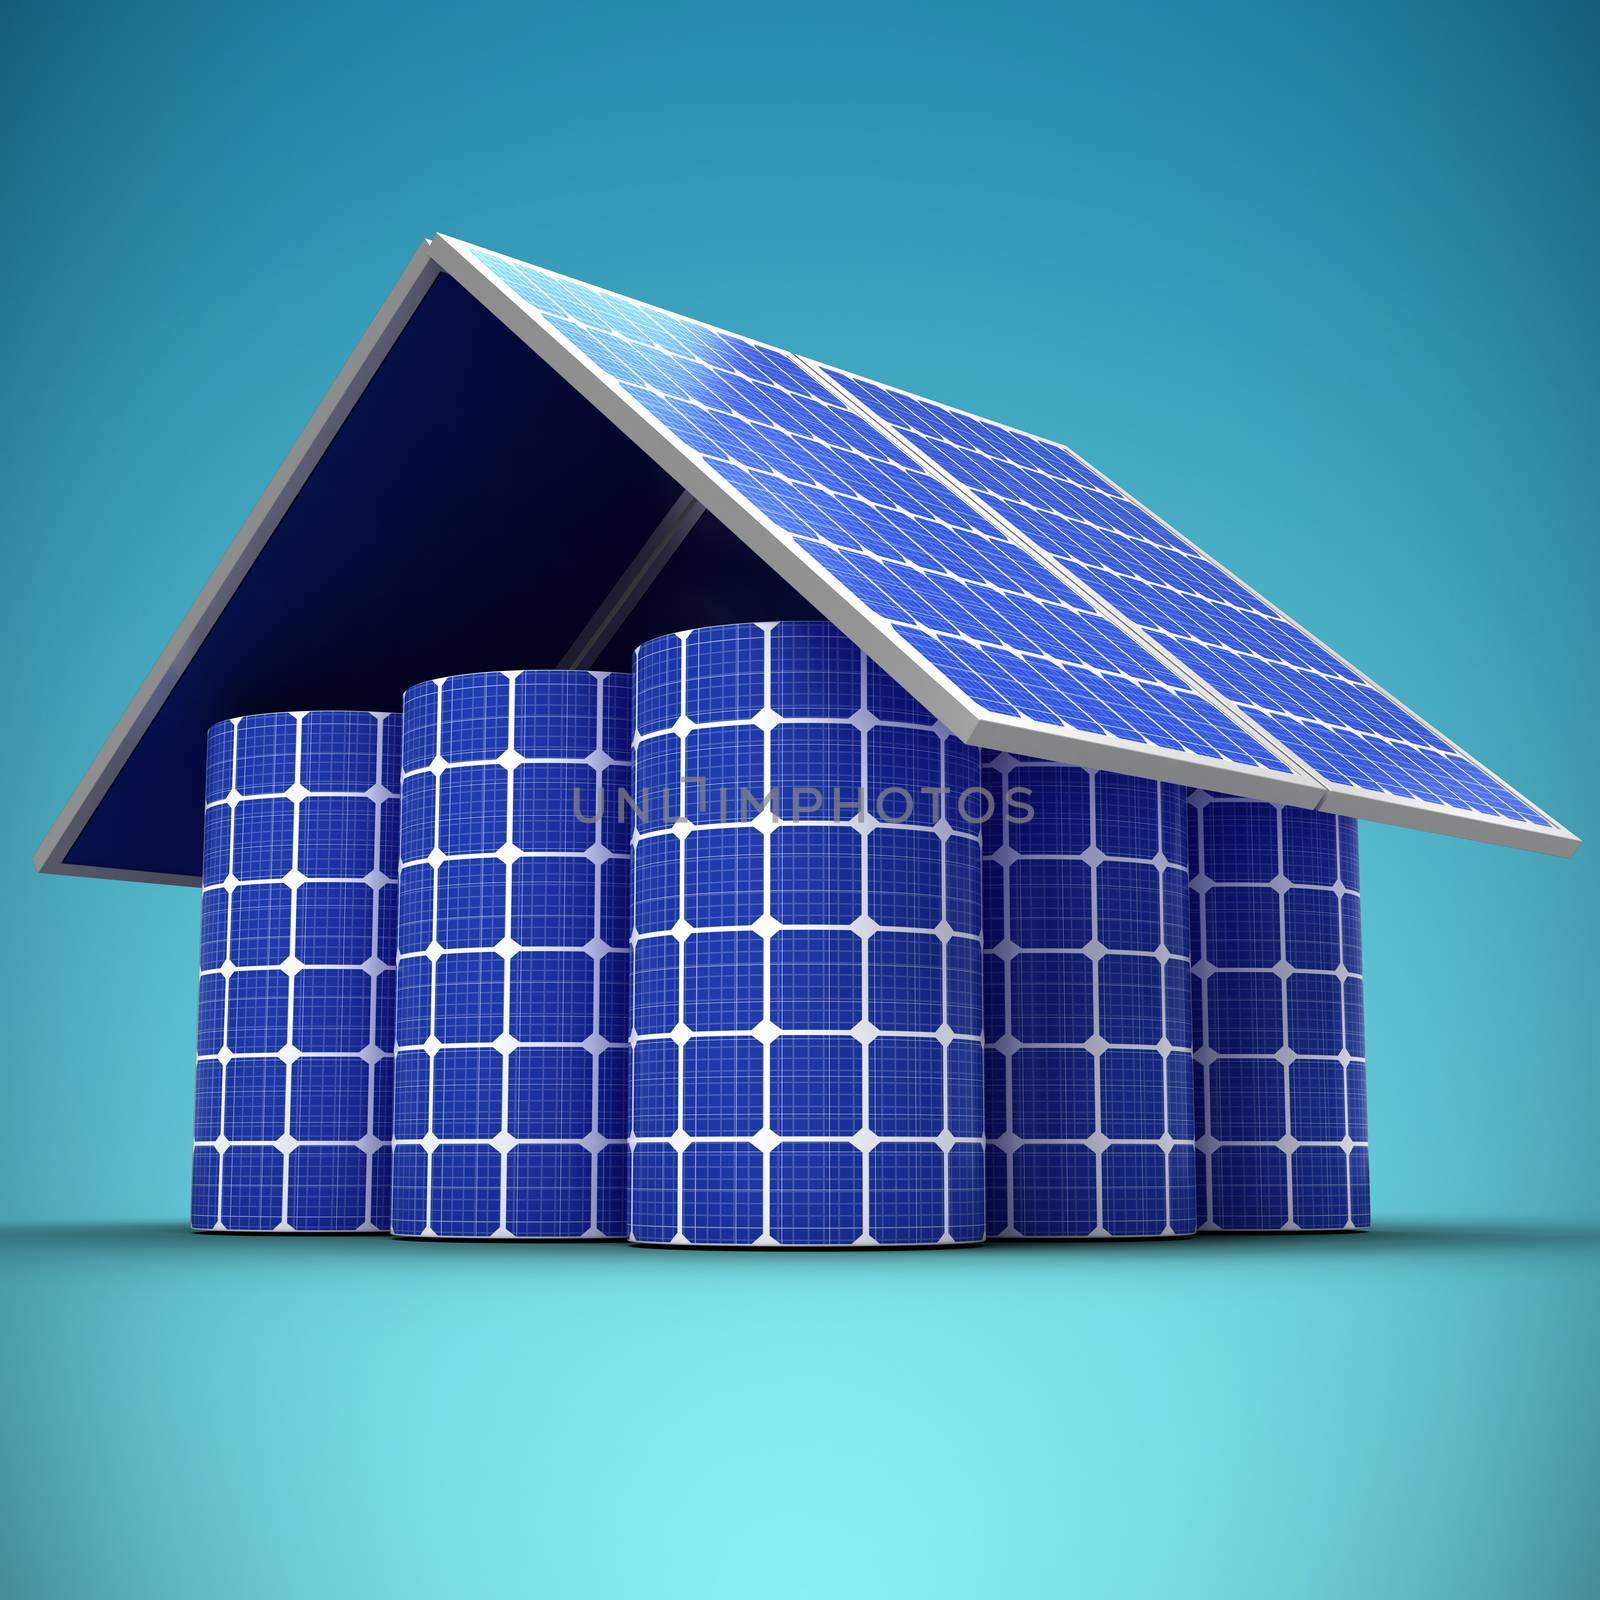 3d image of house made from solar panels and cells against blue vignette background